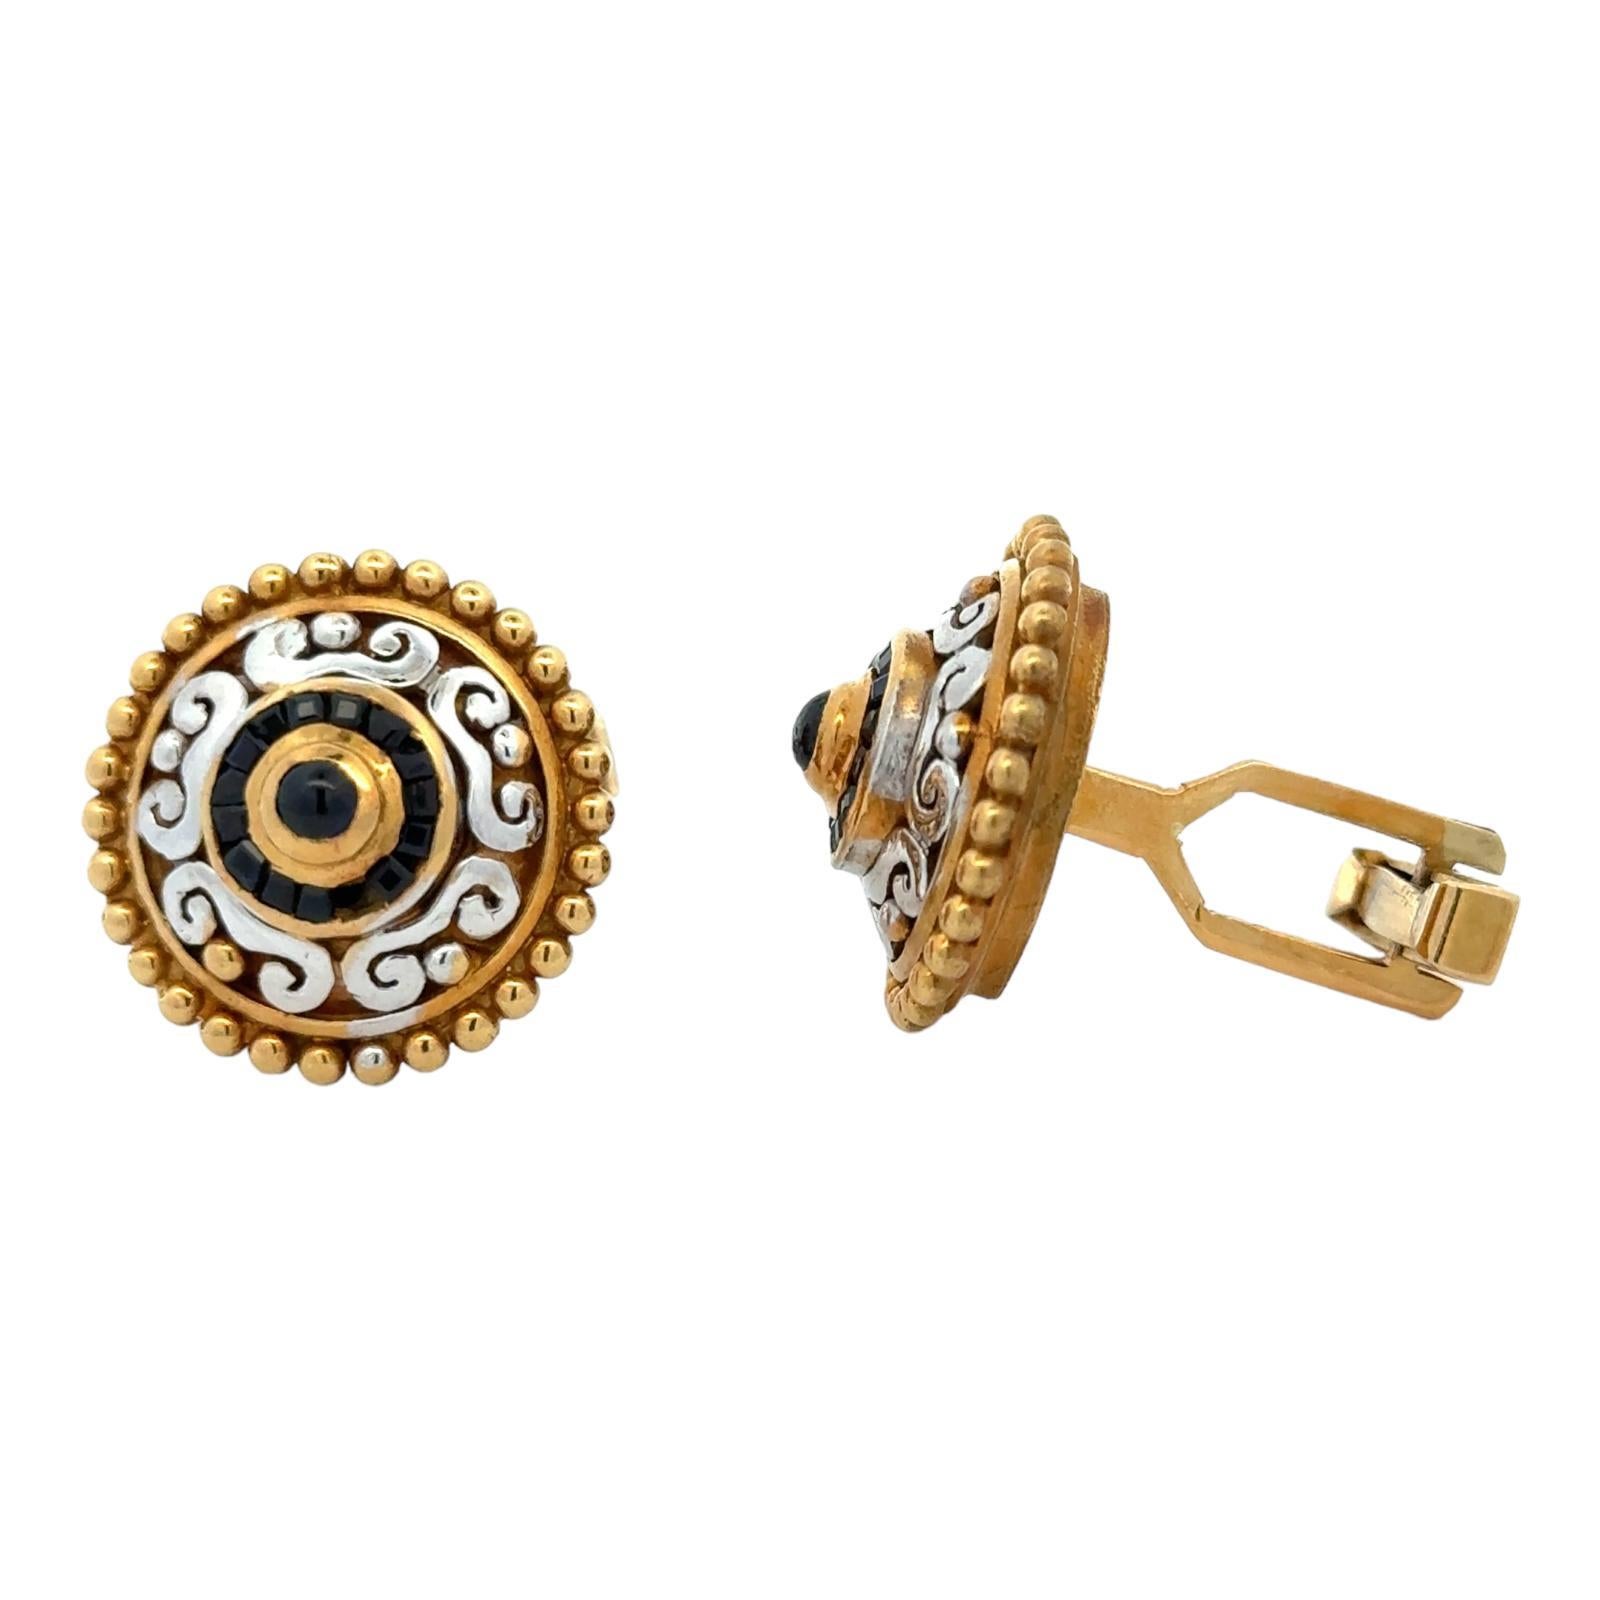 Contemporary men's cufflinks crafted in 18 karat white & yellow gold. The cufflink finding is 14 karat yellow gold. They feature blue sapphire gemstones and measure 20mm in diameter. Weight: 22.3 grams.